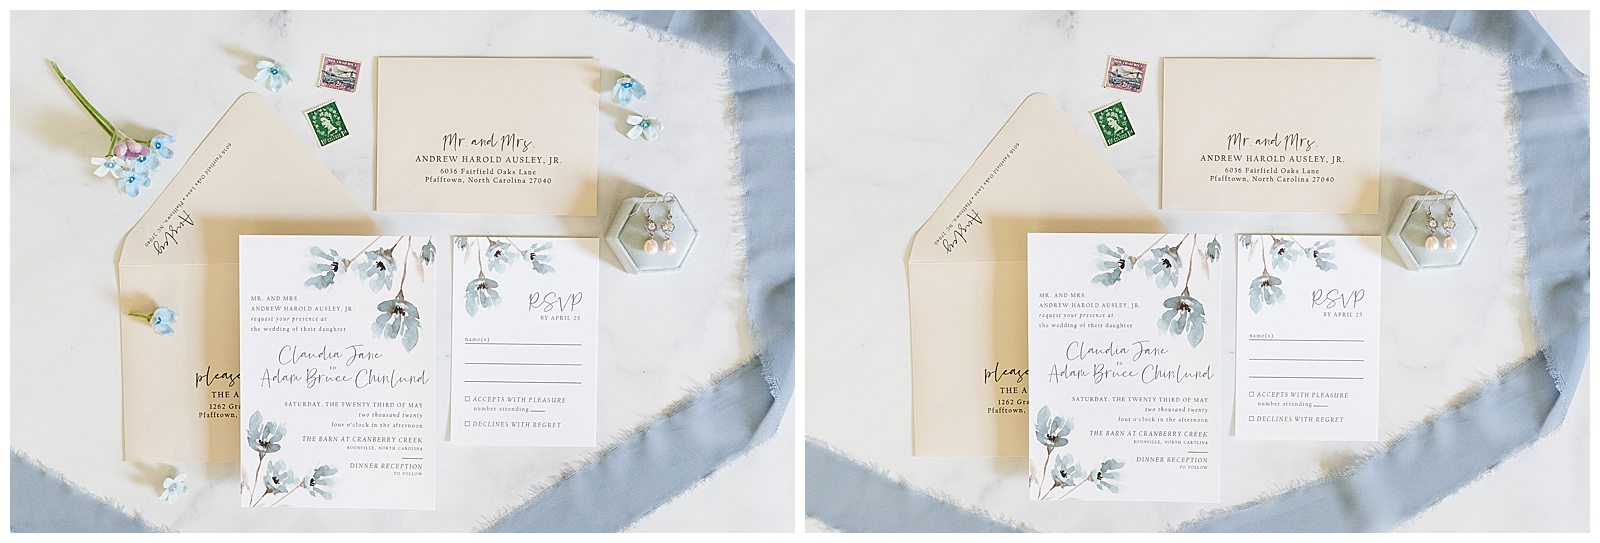 collage of wedding invitation suite by Anna Howe Design, photographed by Jenn Eddine Photography, Inc. showing with and without flowers